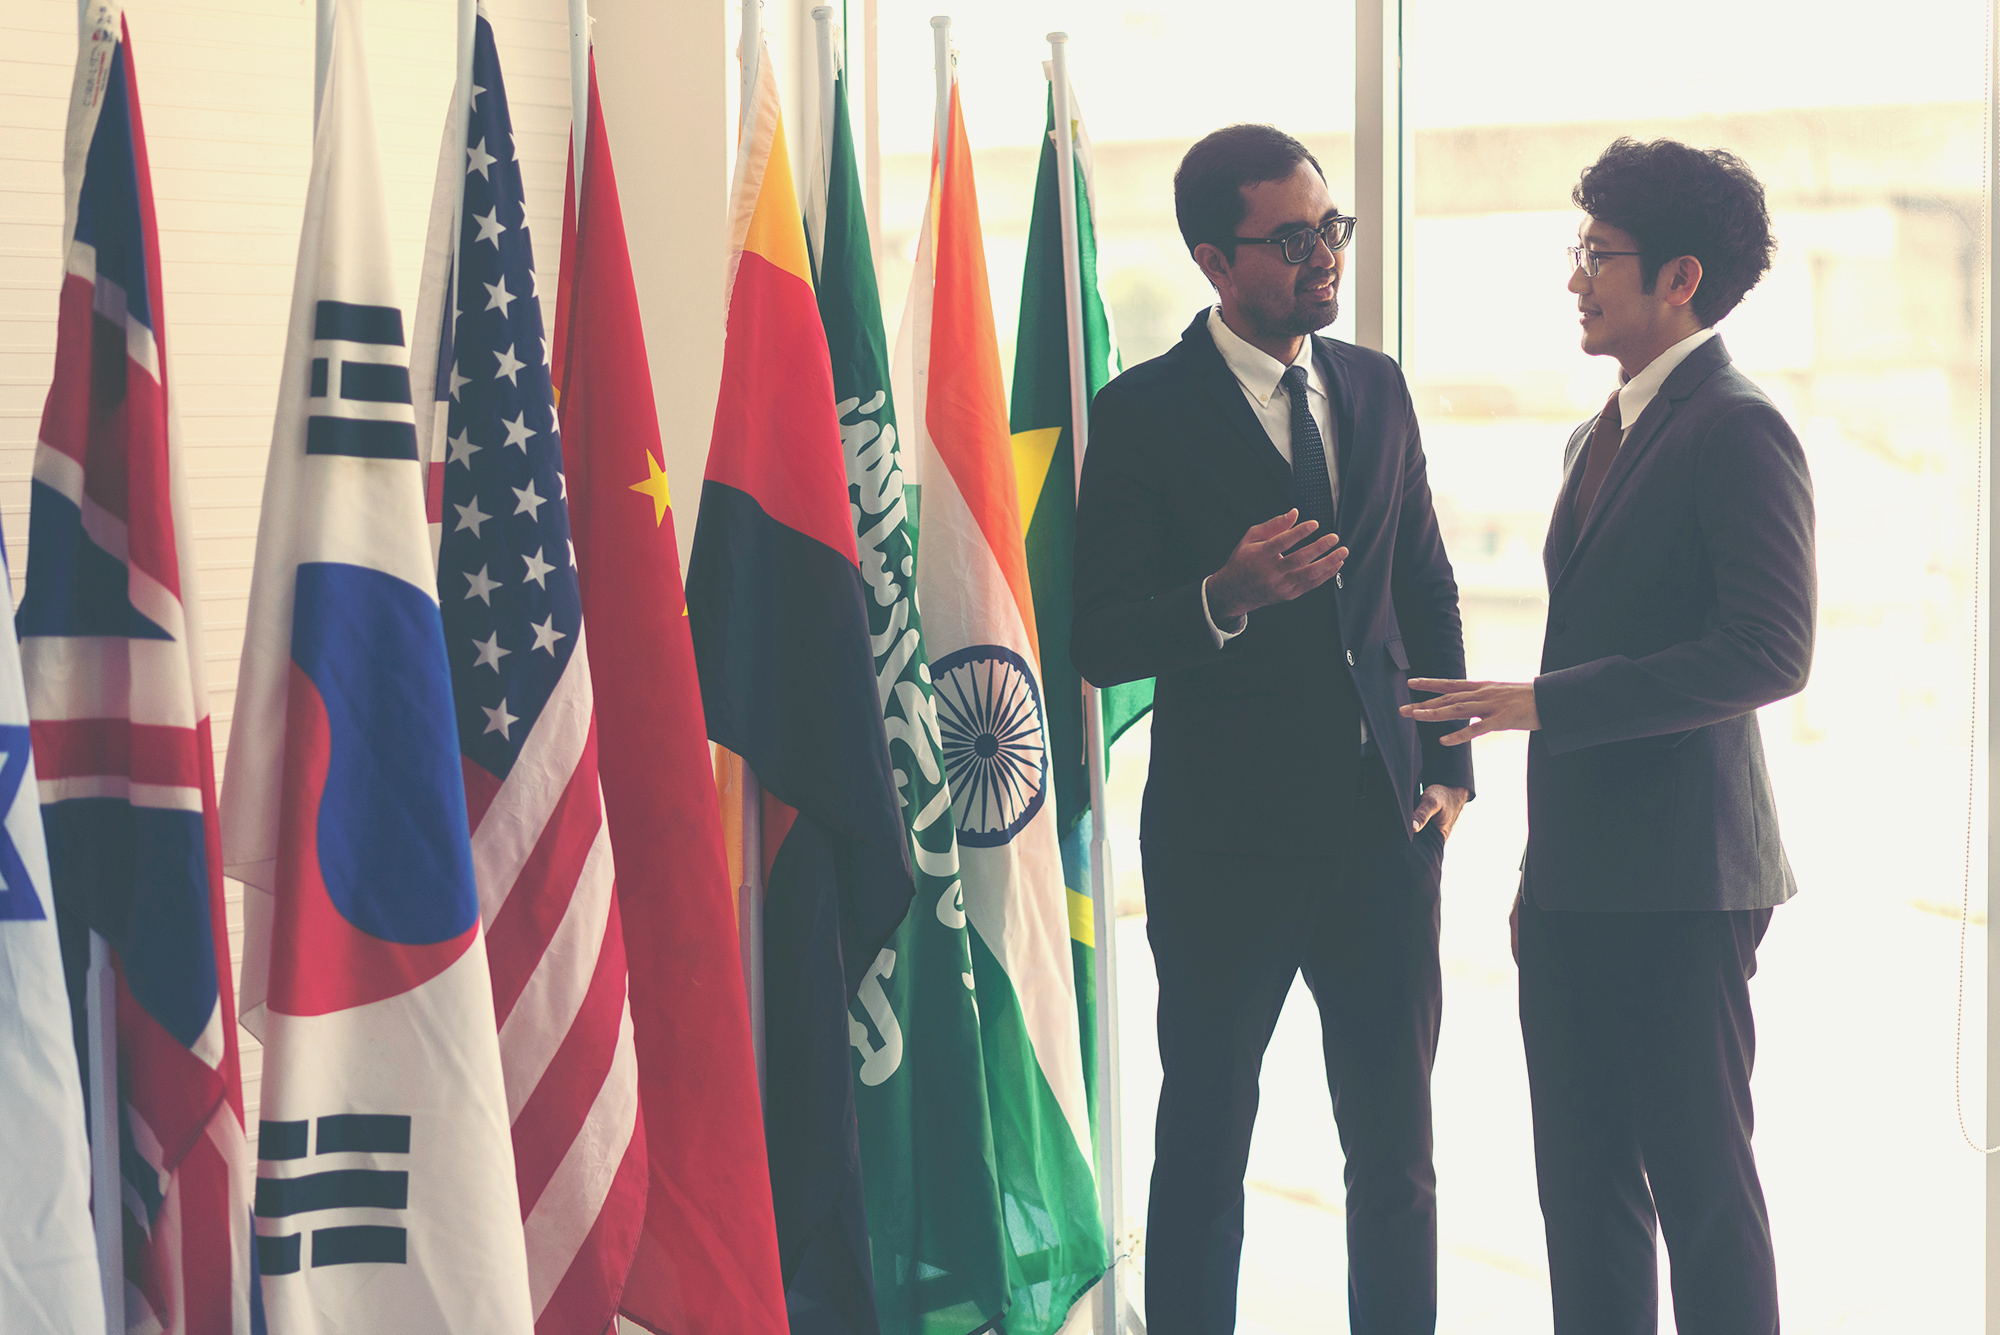 two people having conversation in front of international flags